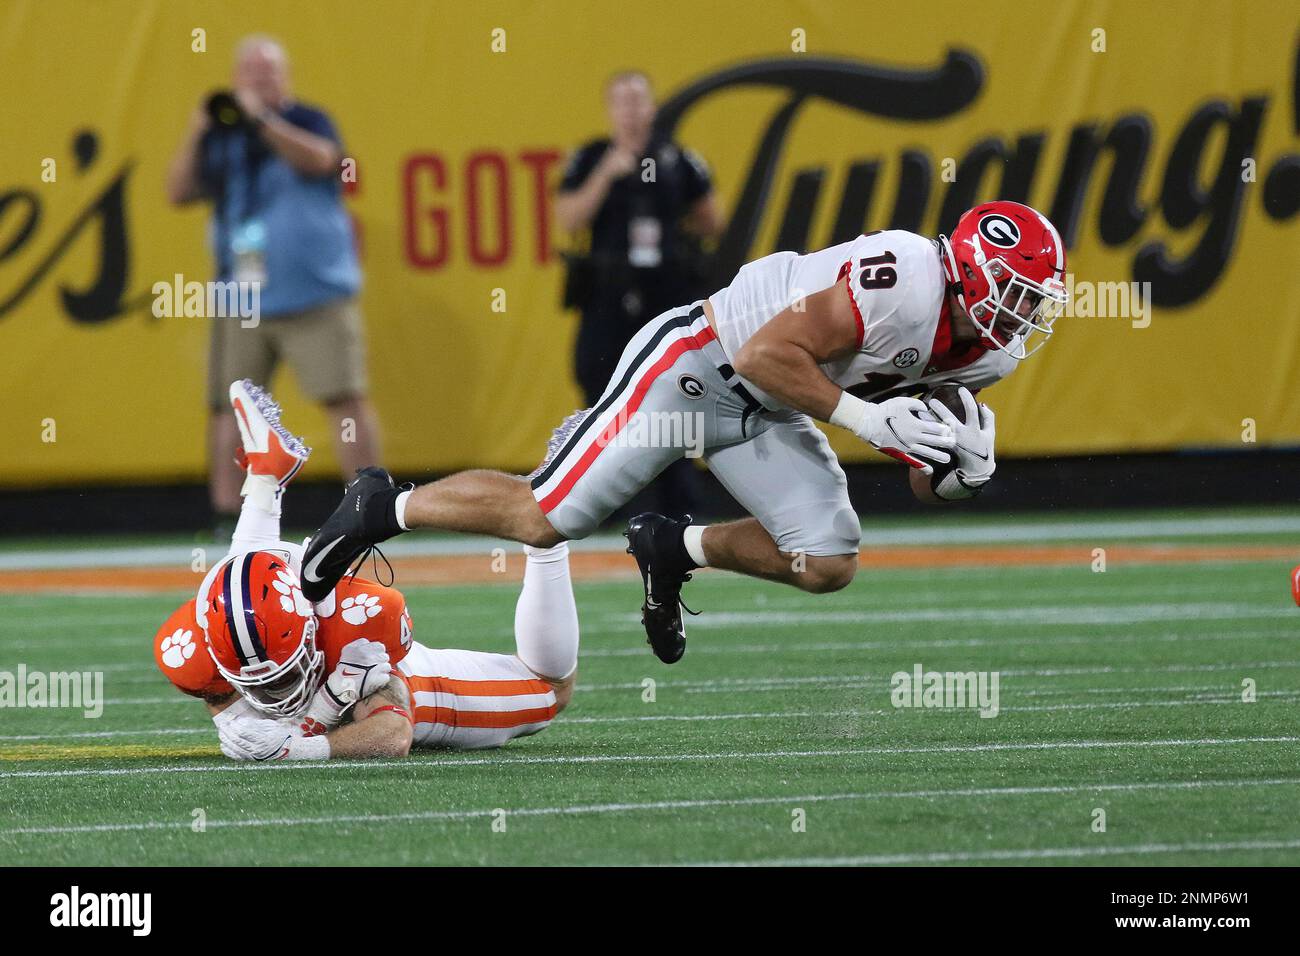 CHARLOTTE, NC - SEPTEMBER 04: James Skalski (47) linebacker of Clemson  trips up Brock Bowers (19) tight end of Georgia after making a catch during  the Duke's Mayo Classic college football game